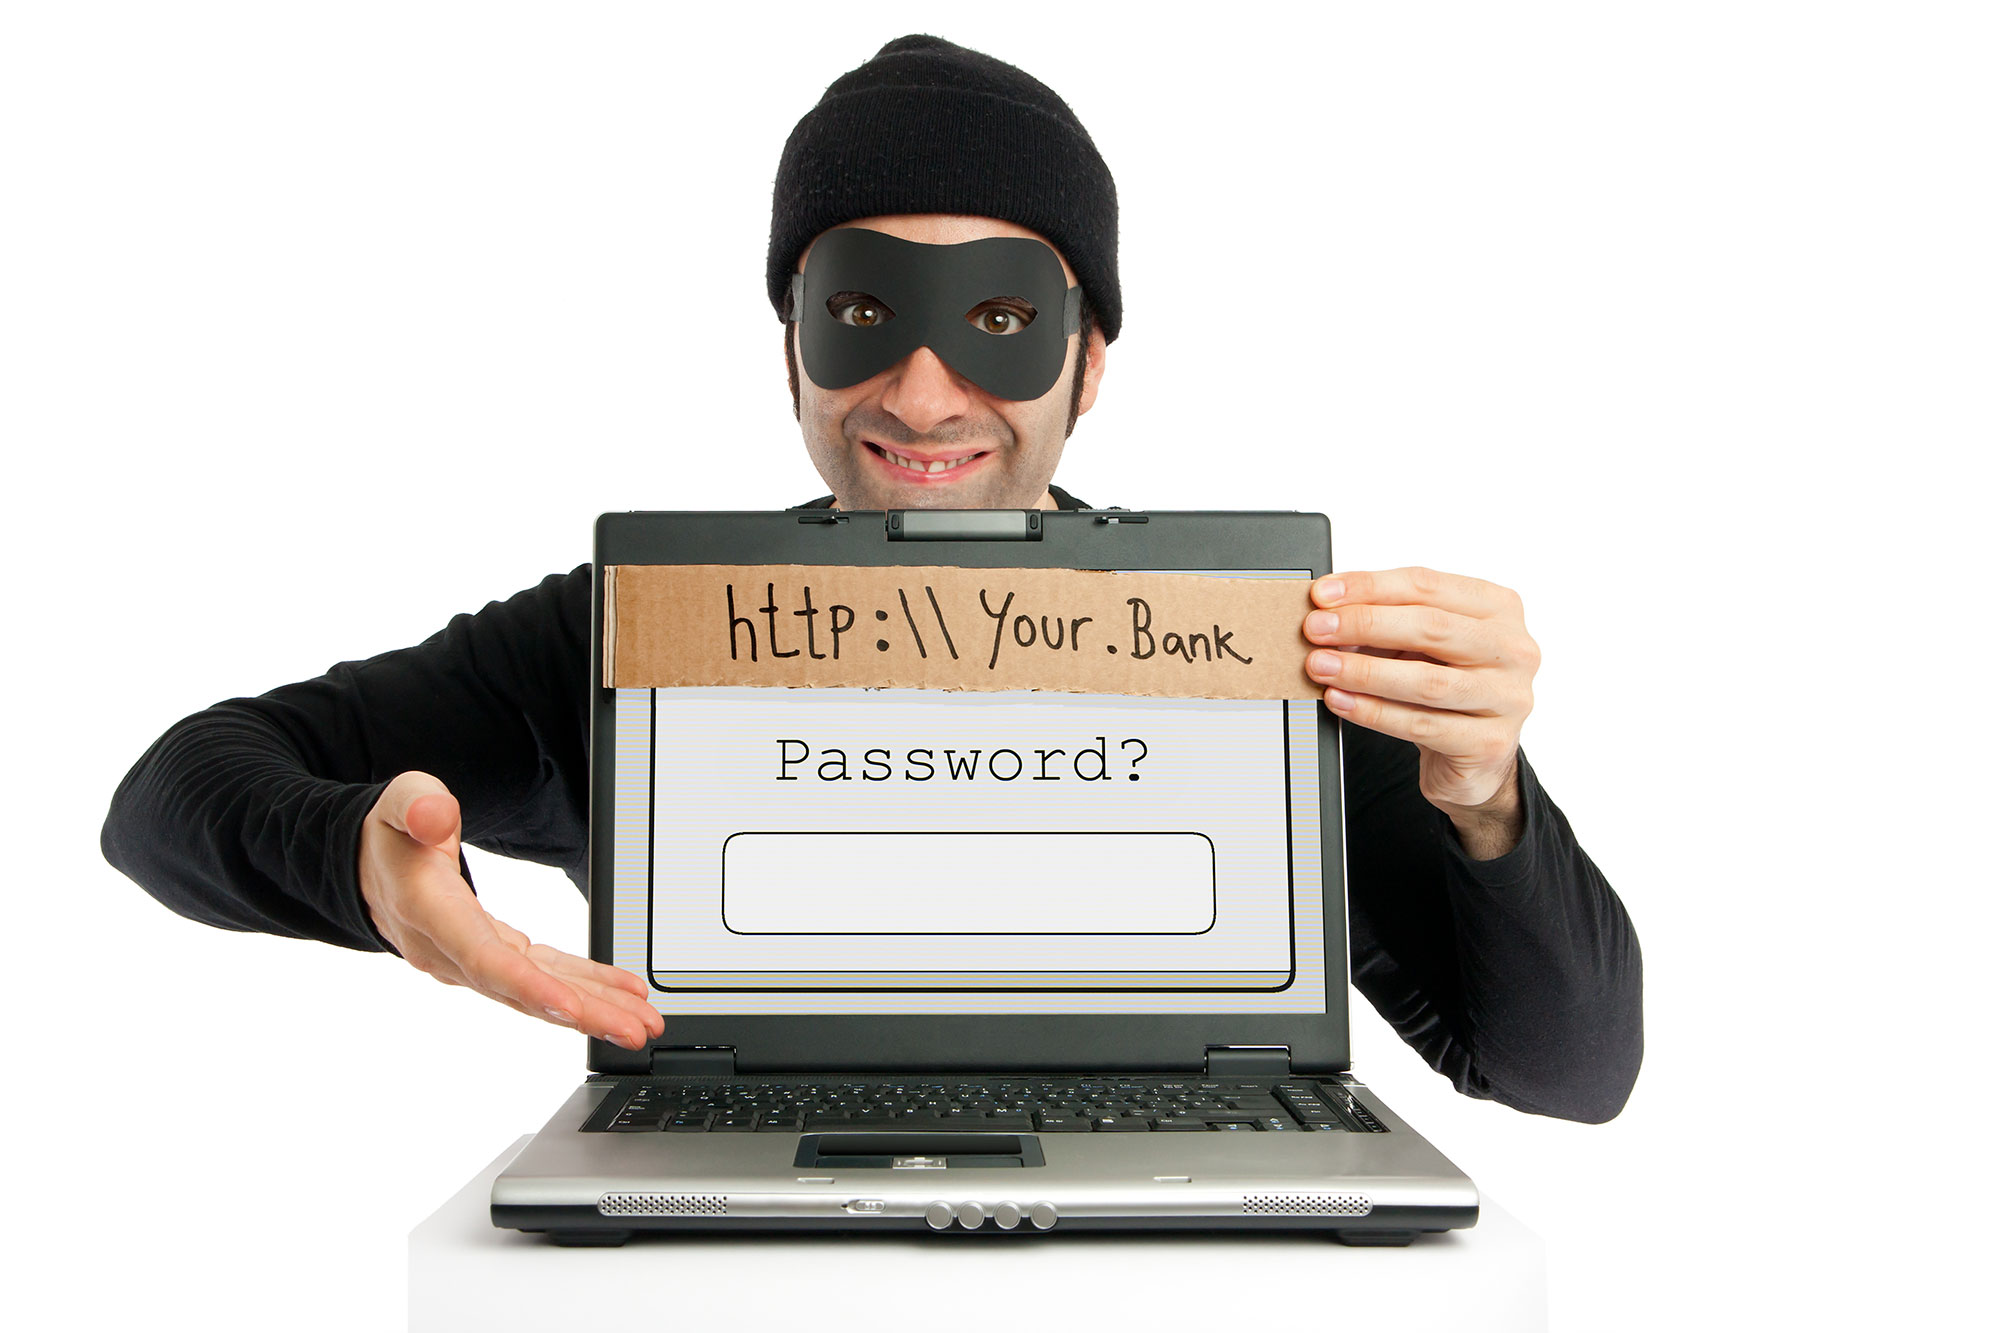 Masked scammer holding a computer inviting you to give him bank information